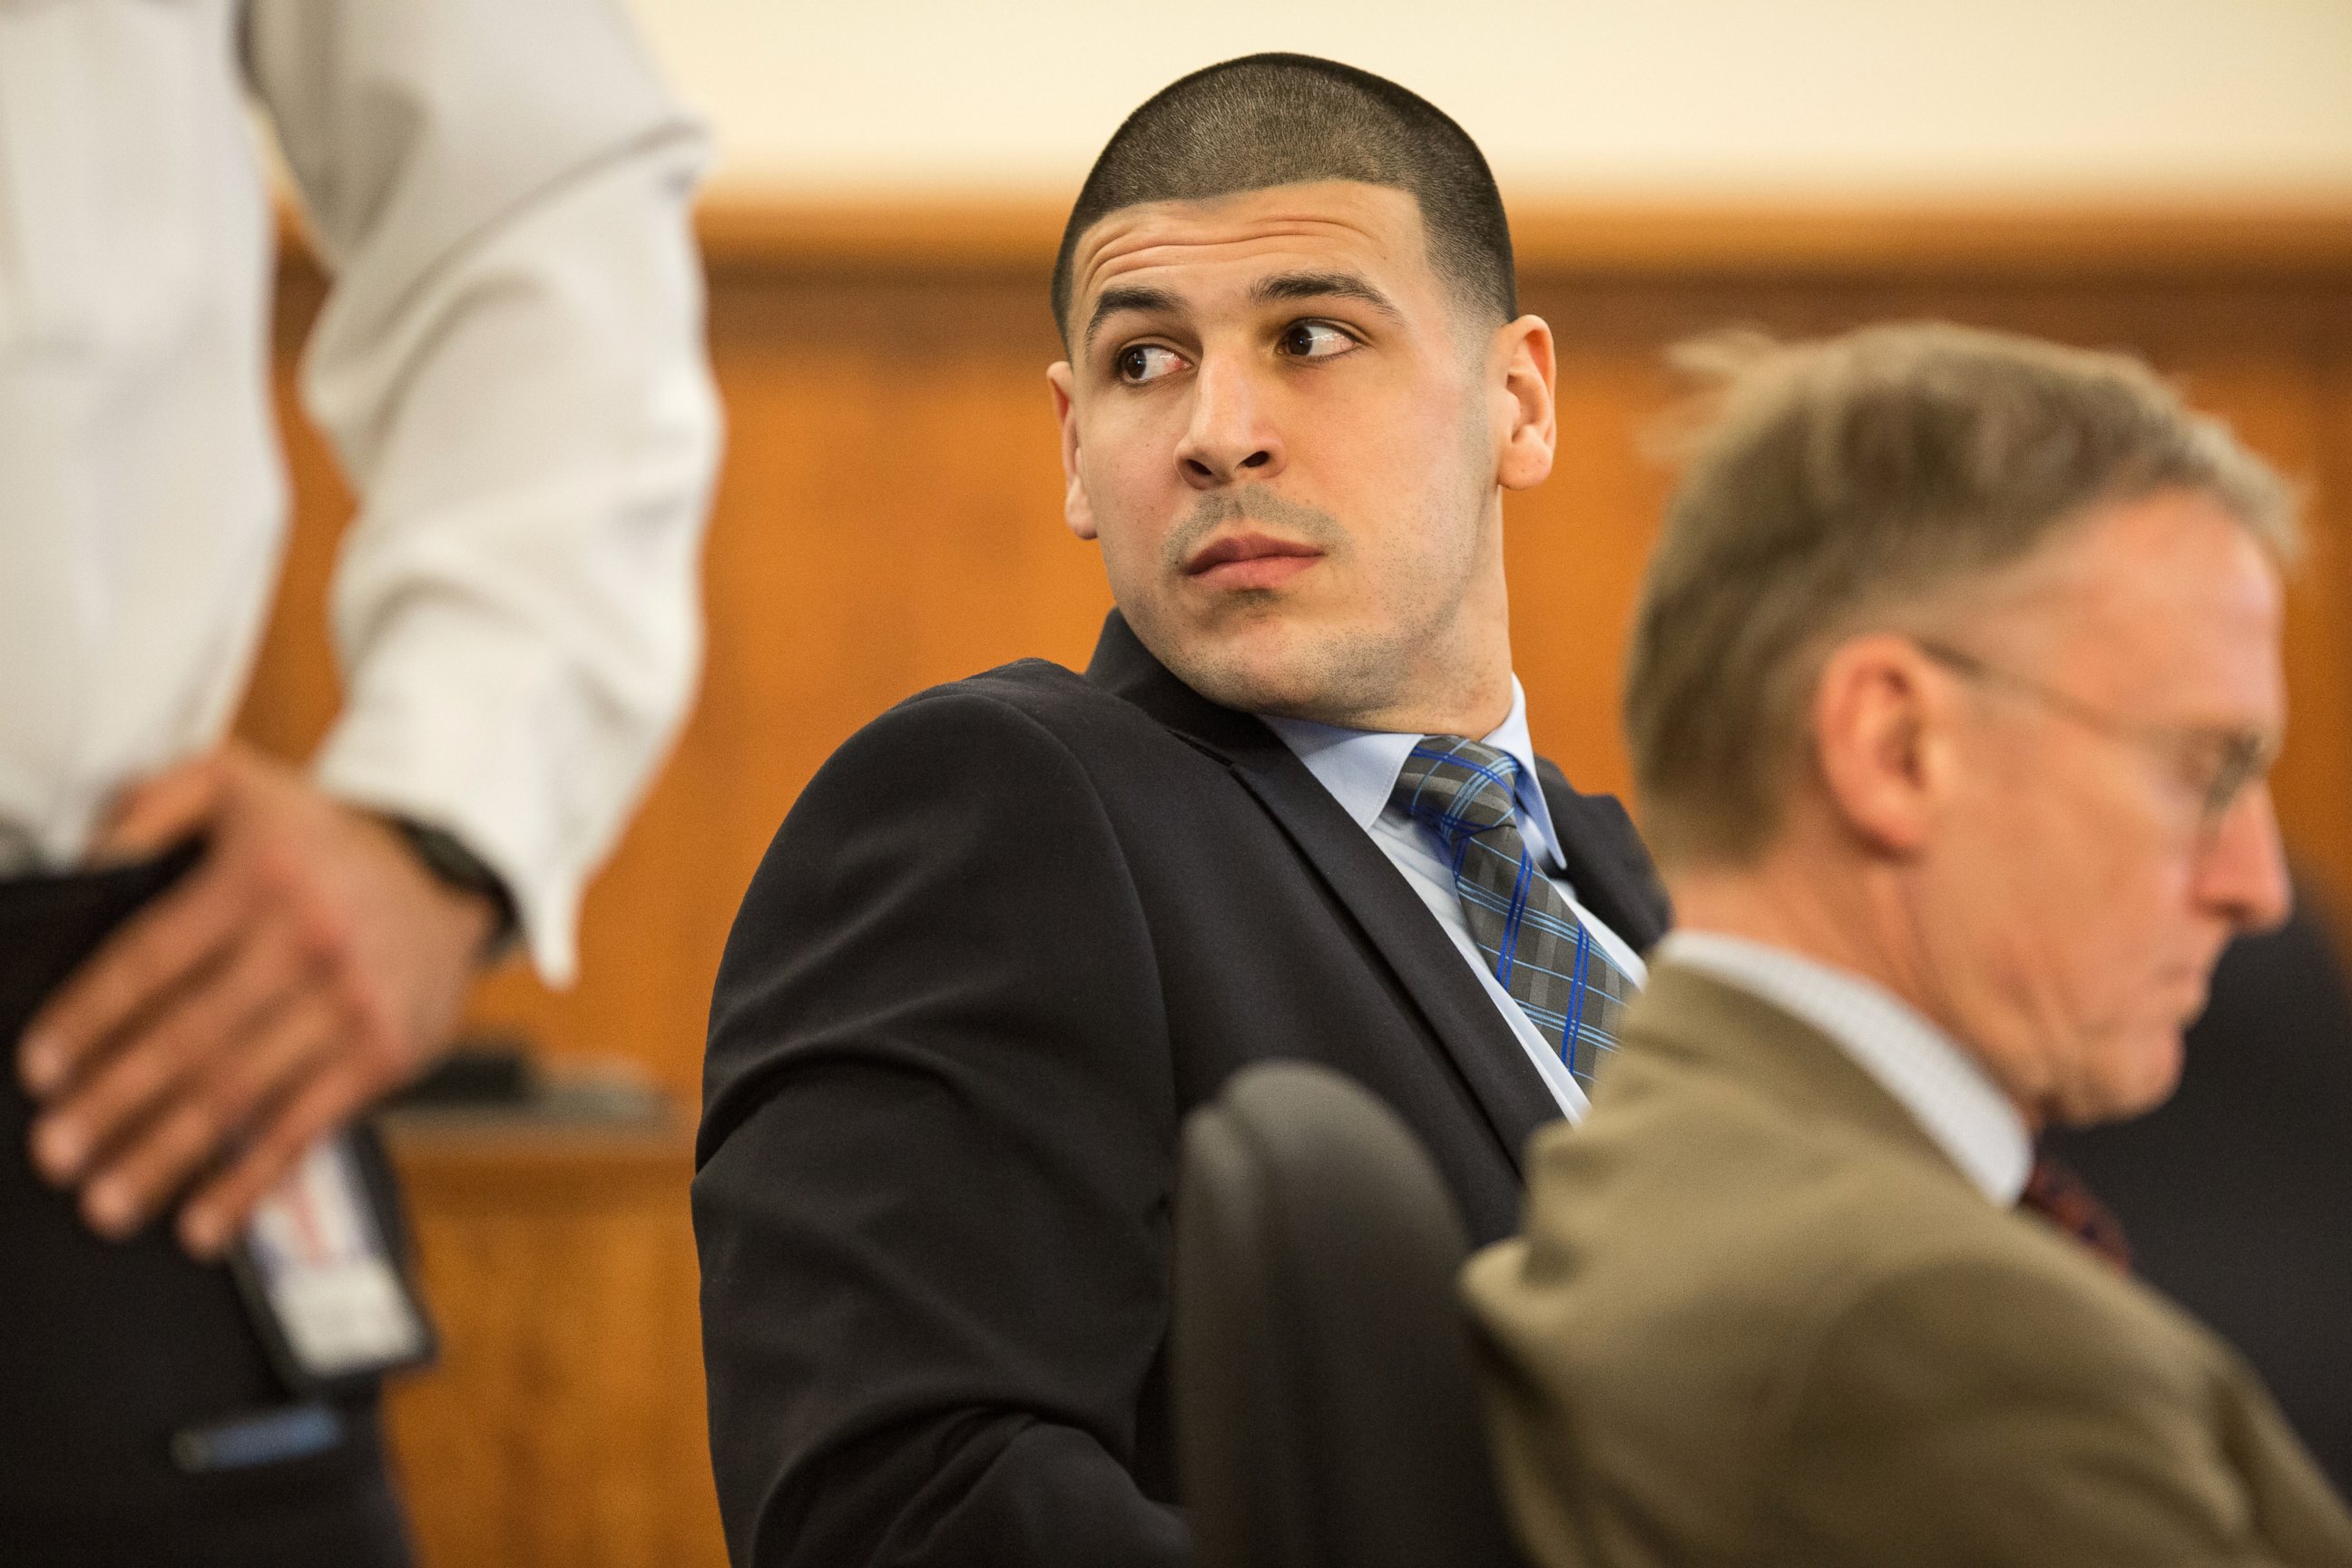 PHOTO:Aaron Hernandez watches as Robert Kraft entered the courtroom during the murder trial of former New England Patriots tight end at Bristol County Superior Court in Fall River, Mass., March 31, 2015.  